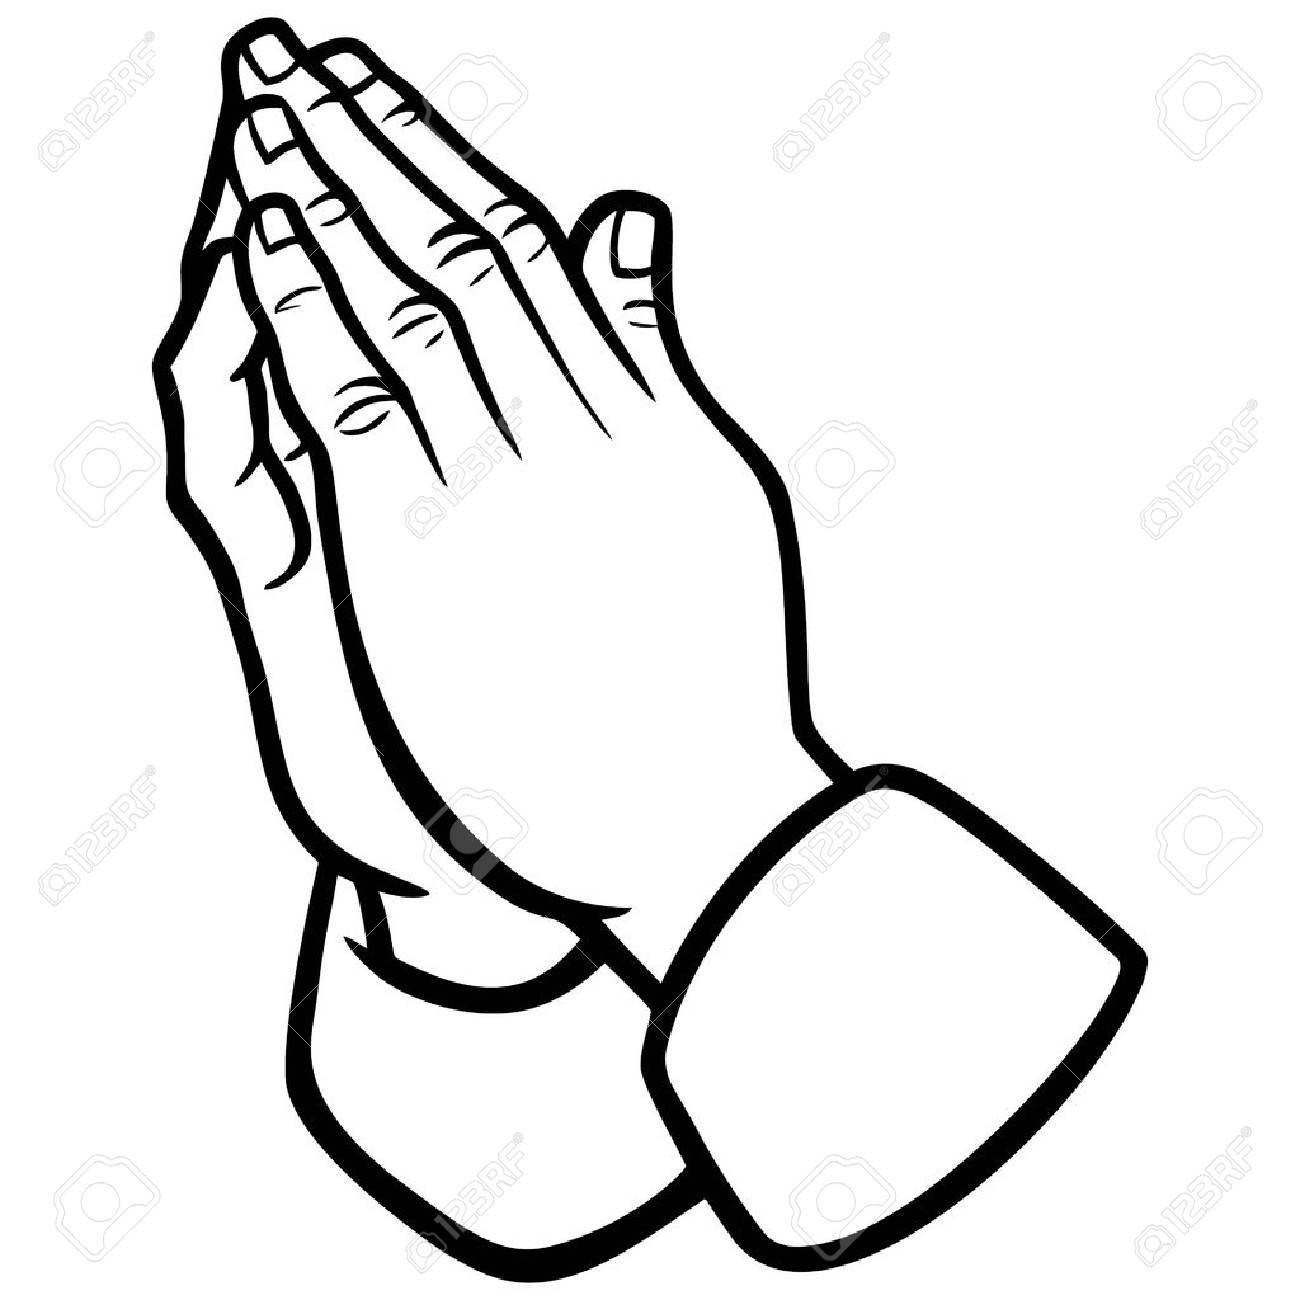 The best free Praying hands vector images. Download from 1140 free ...